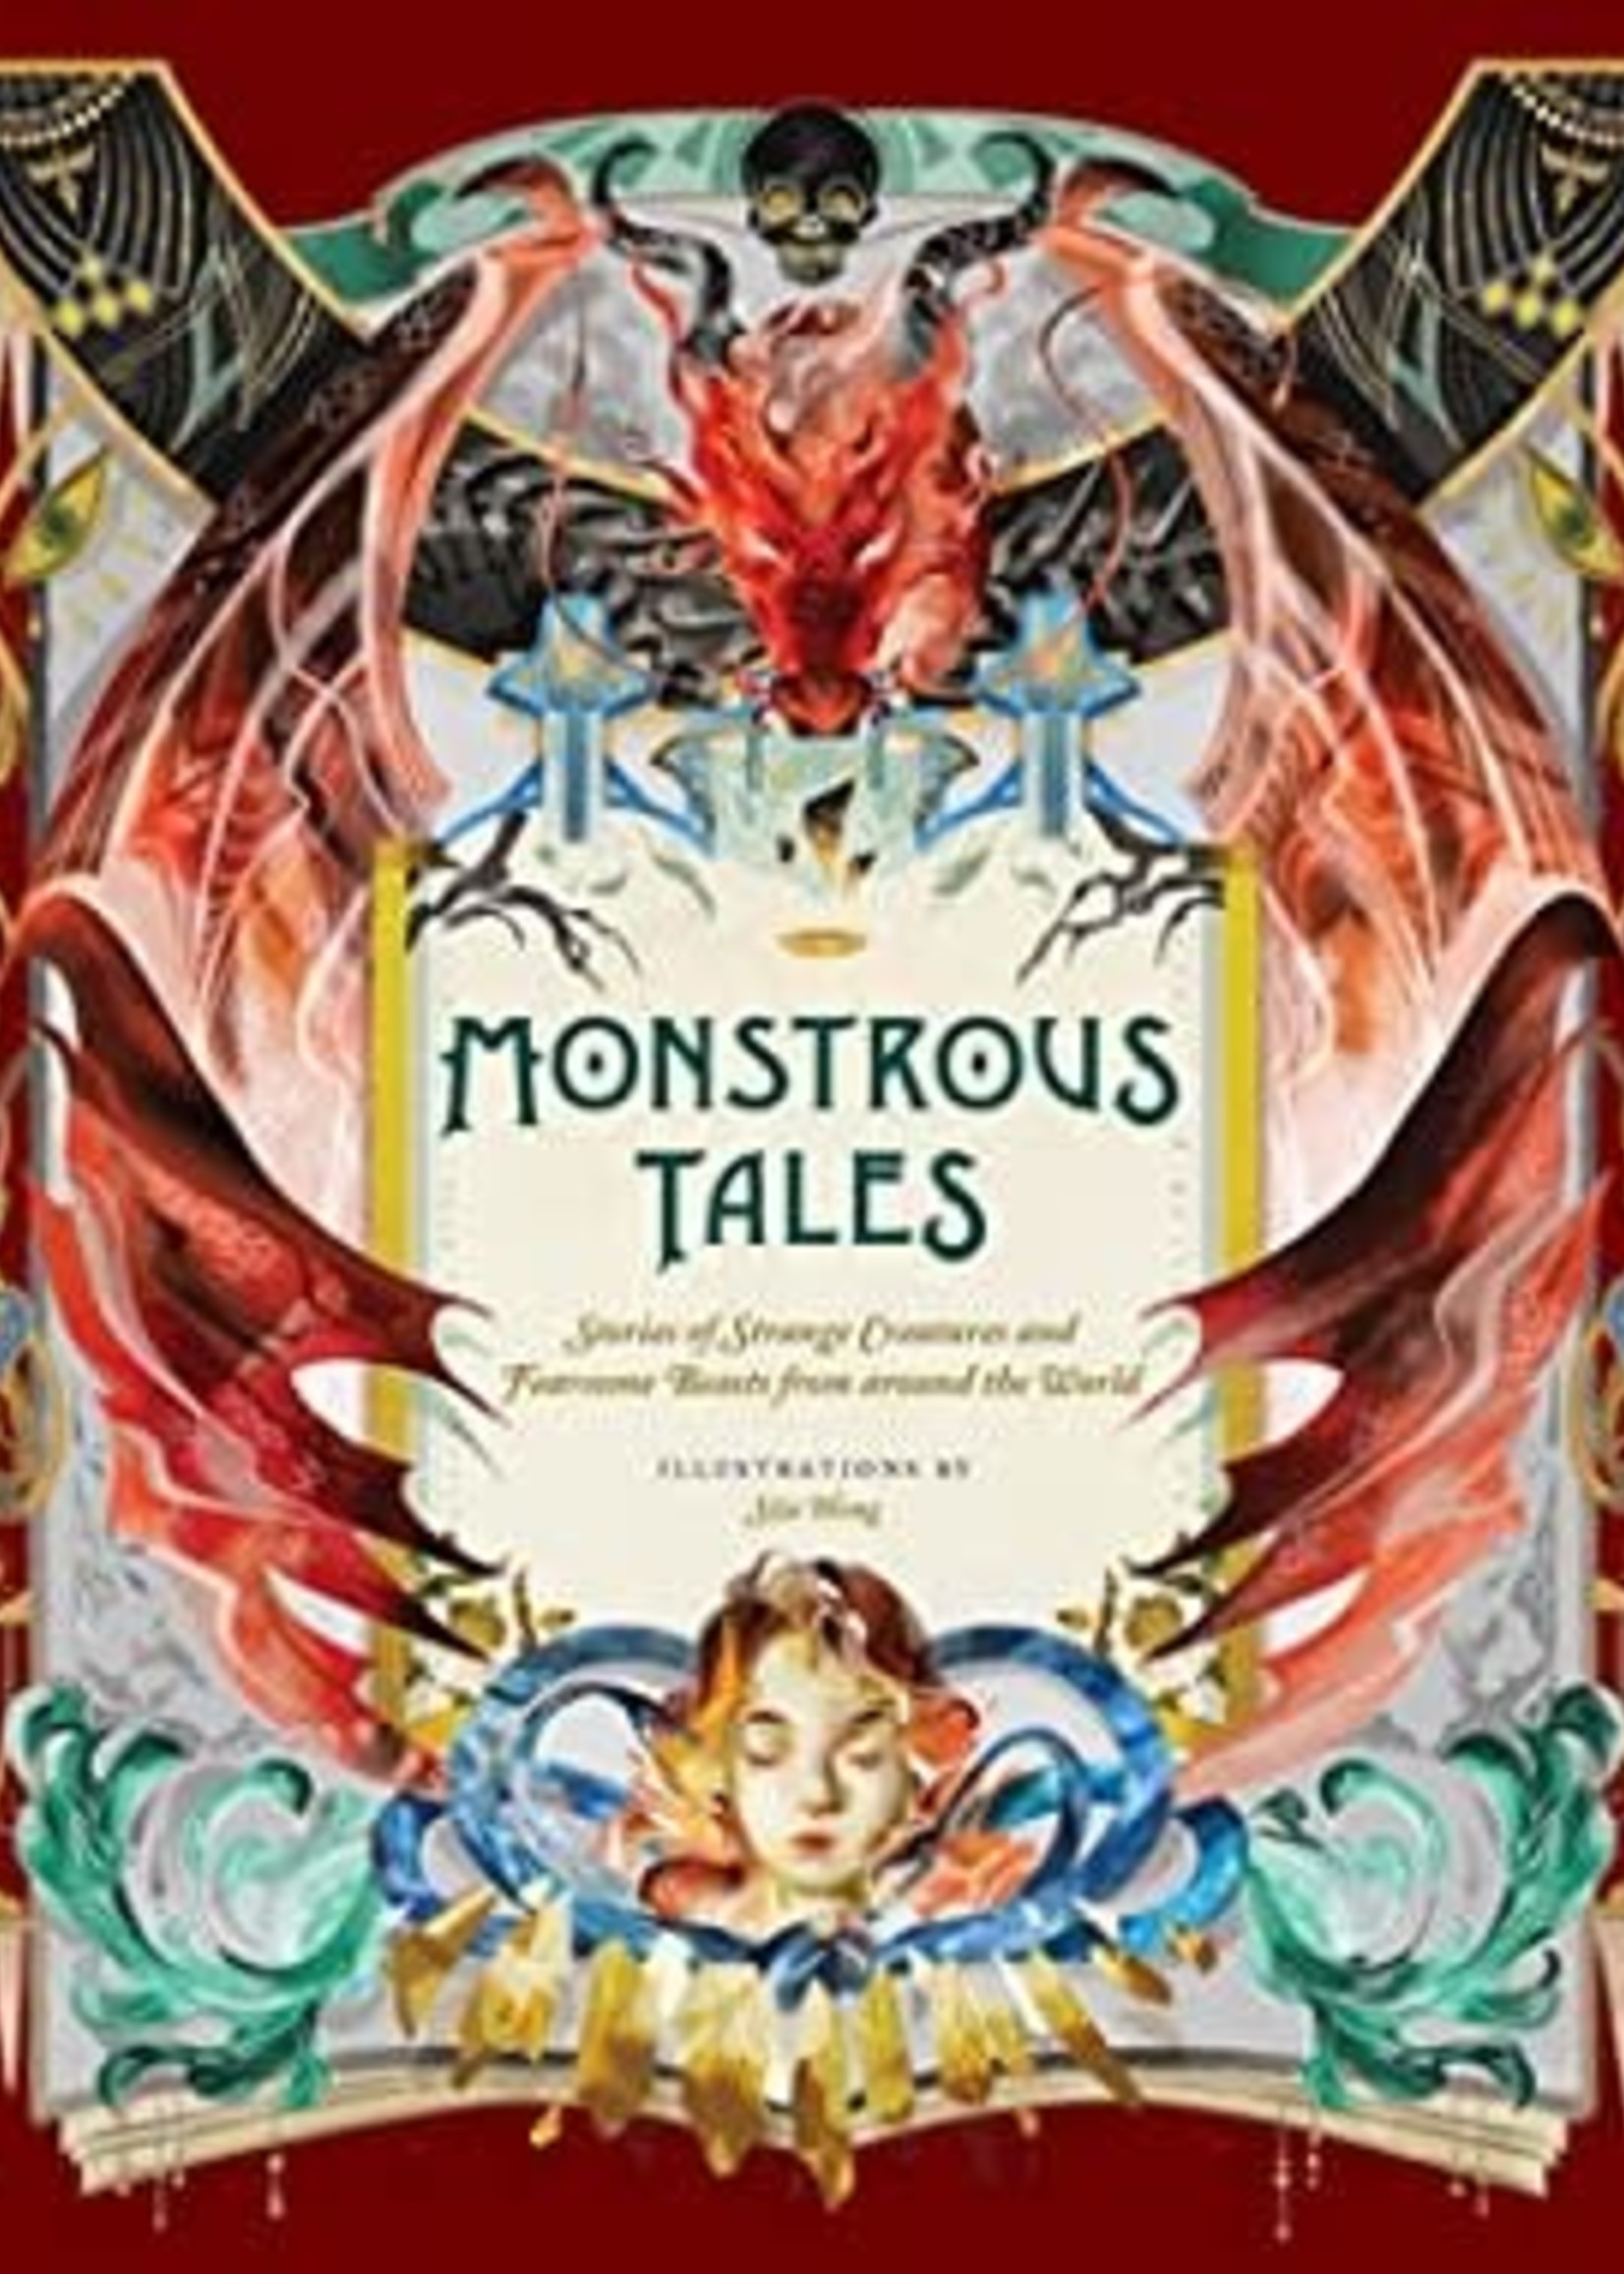 Monstrous Tales: Stories of Strange Creatures and Fearsome Beasts from Around the World by Sija Hong,  Chronicle Books